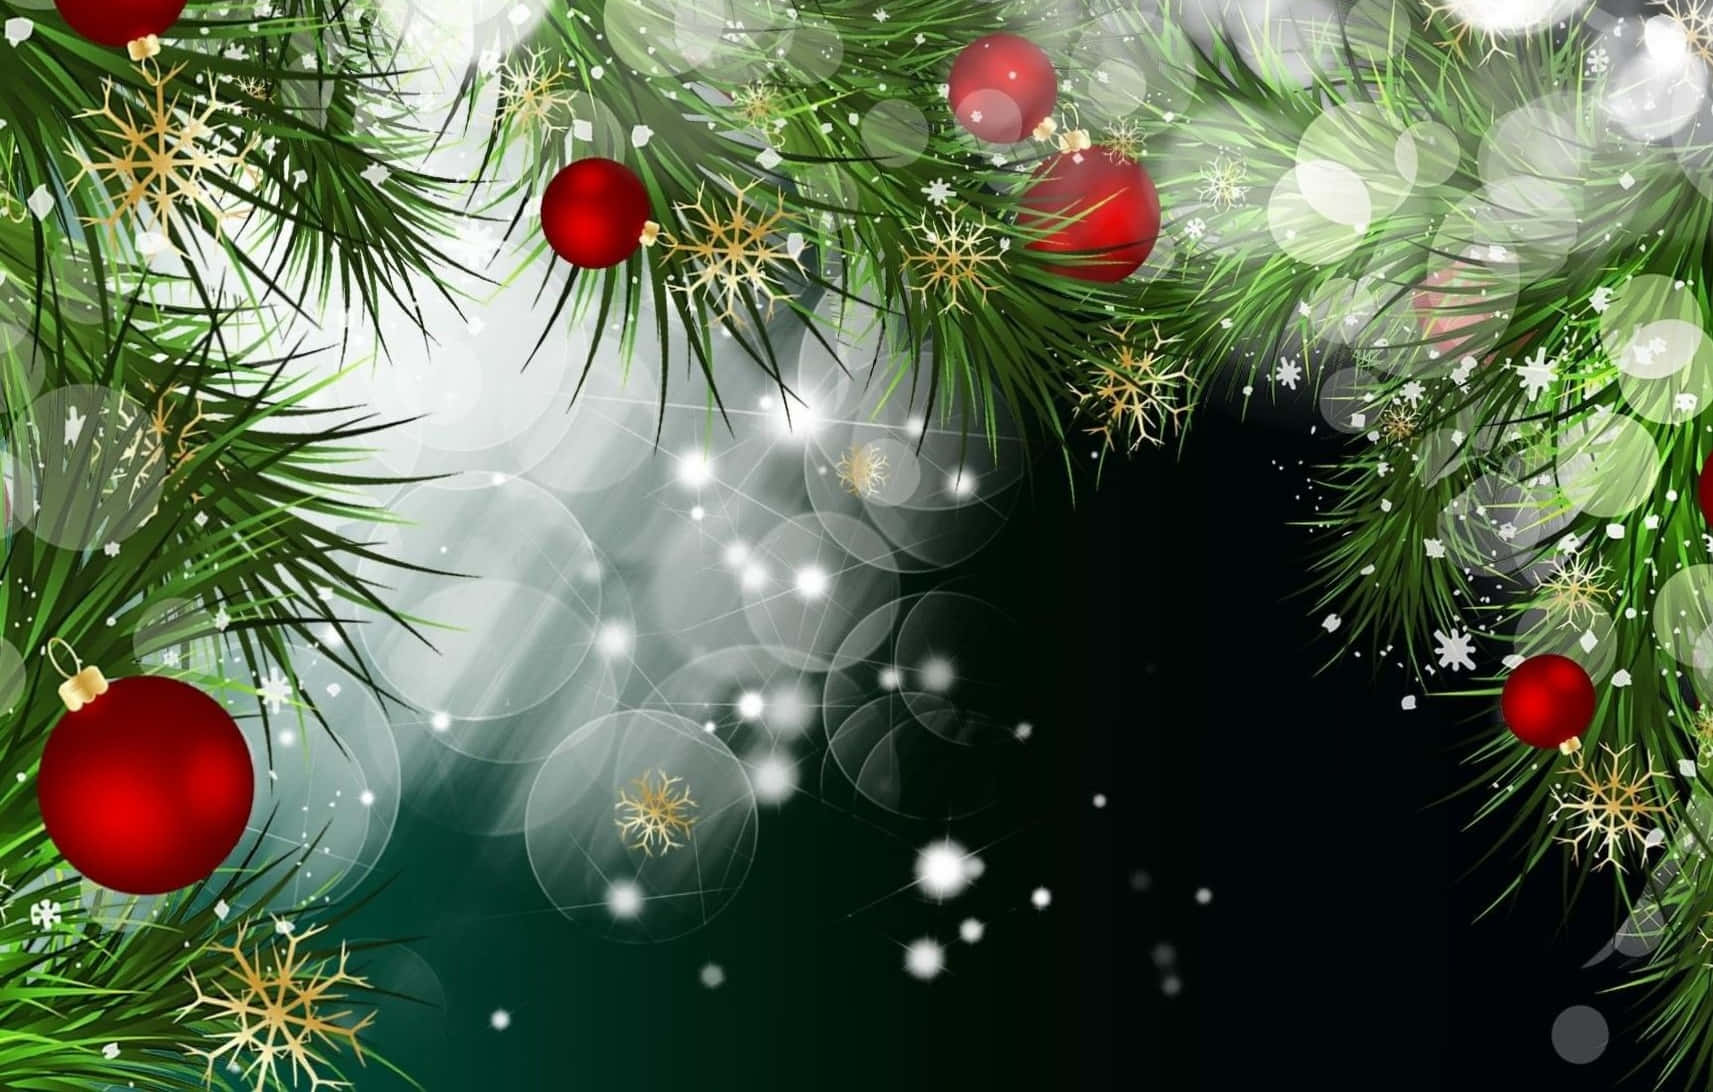 Download Celebrate the holidays with red and green Wallpaper ...